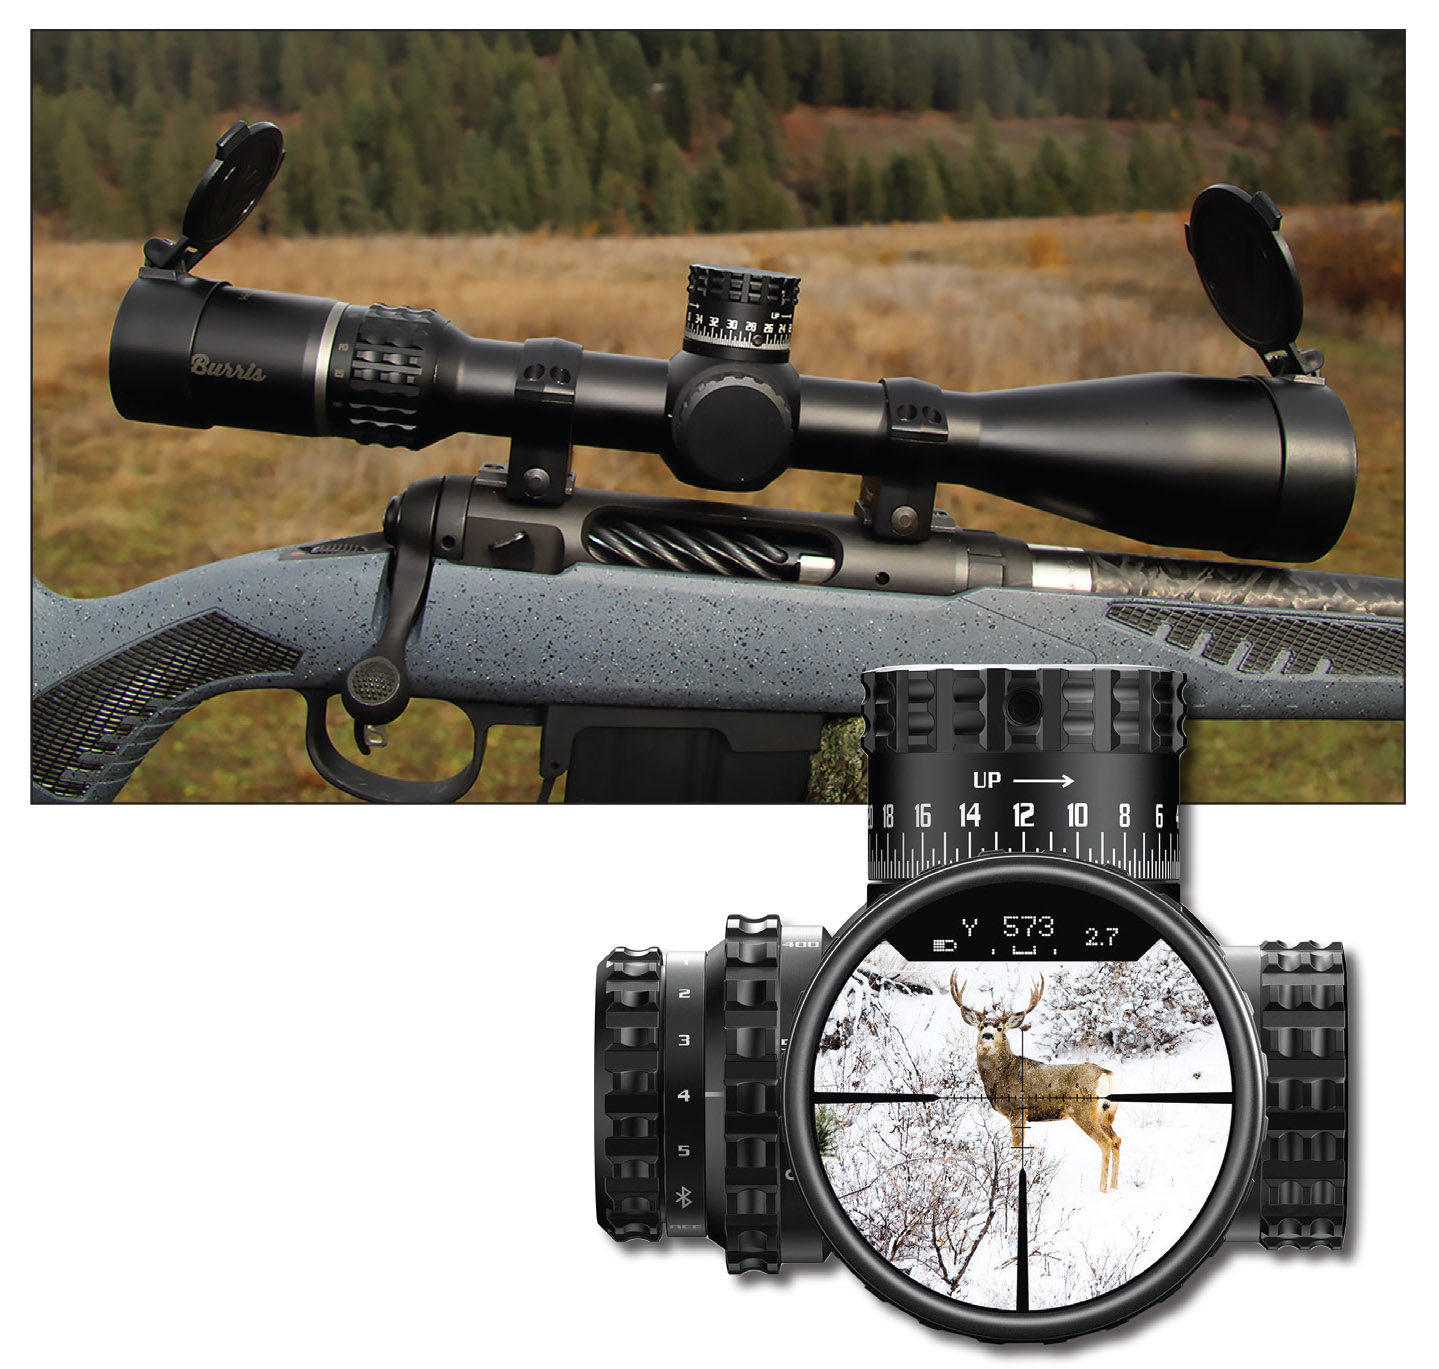 Burris’ versatile Veracity PH 4-20x 50mm riflescope makes it a great option whether hunting big game, banging long-range steel or sniping burrowing rodents.